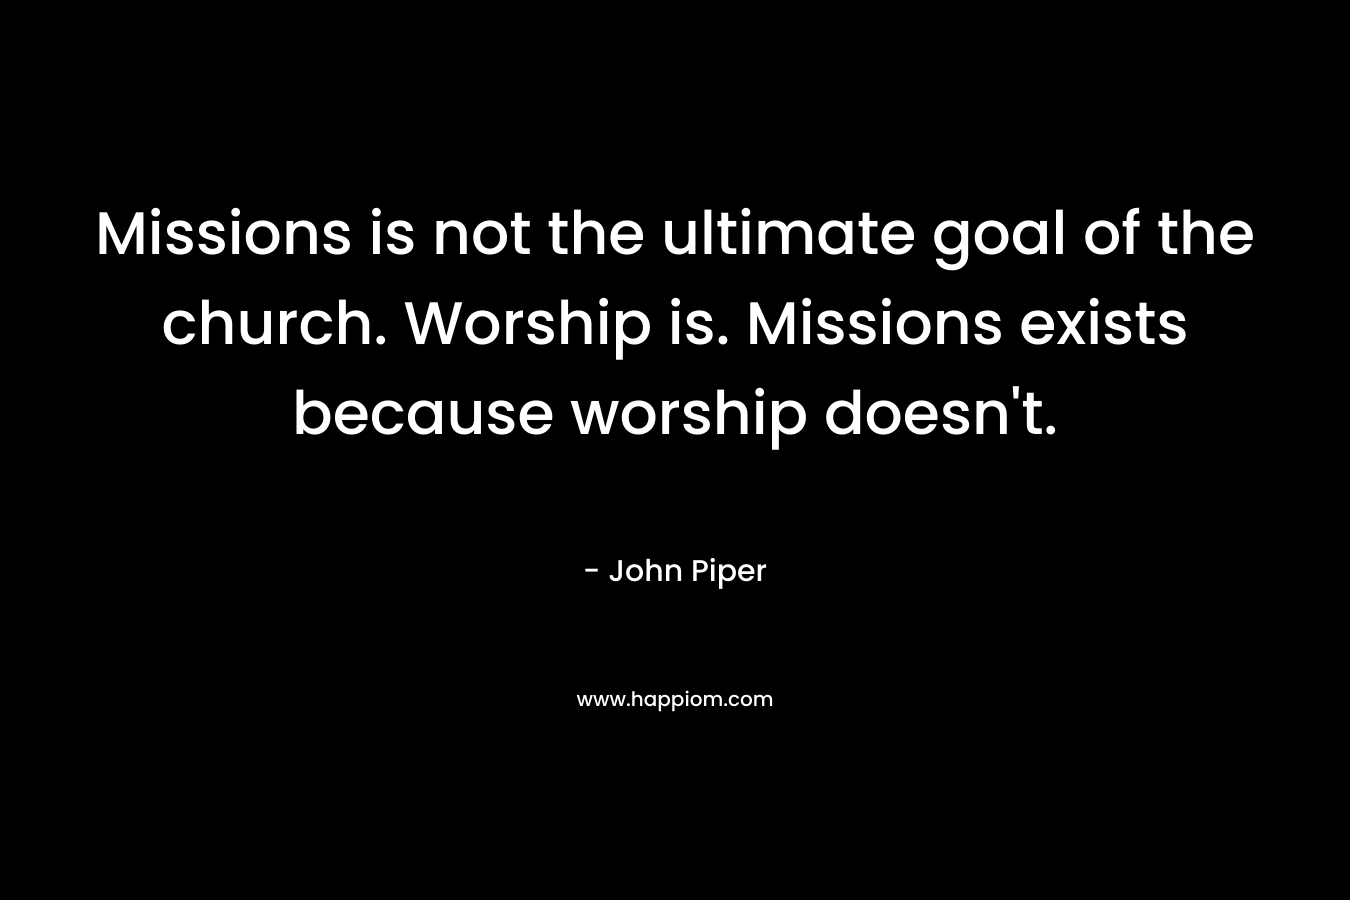 Missions is not the ultimate goal of the church. Worship is. Missions exists because worship doesn't.